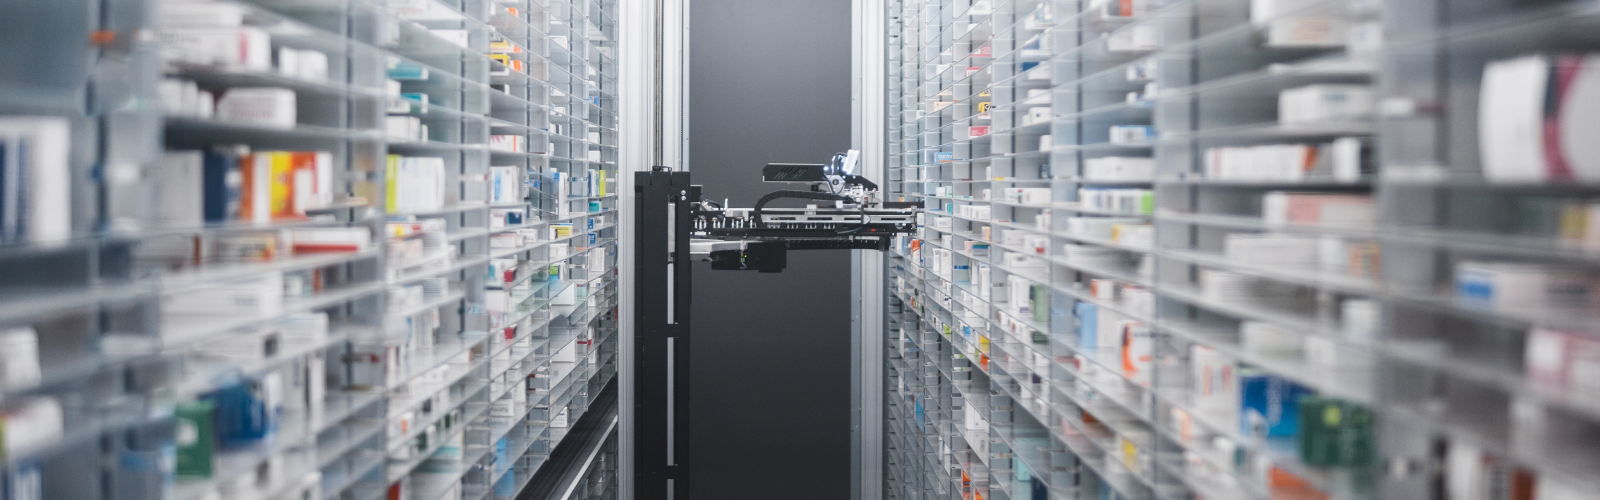 AI in specialty pharmacy robotic AI device selecting medications from the shelf.